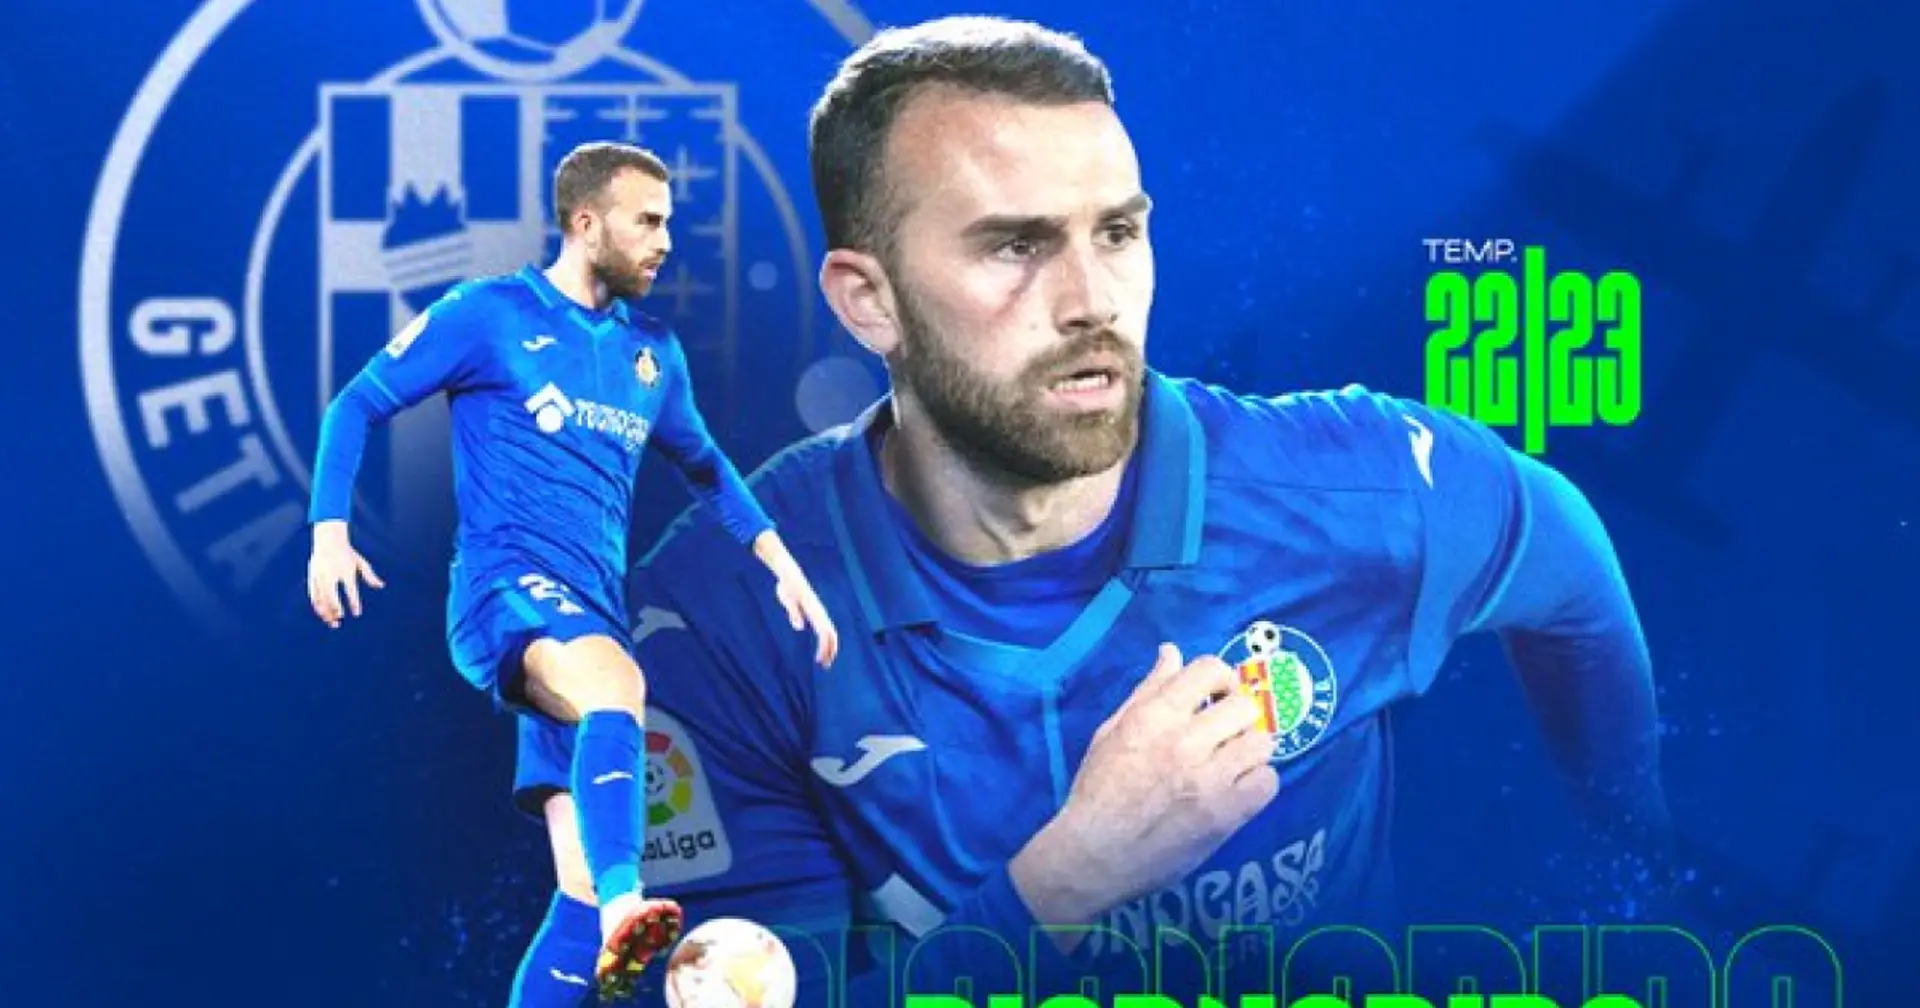 OFFICIAL: Getafe announce Borja Mayoral signing from Real Madrid